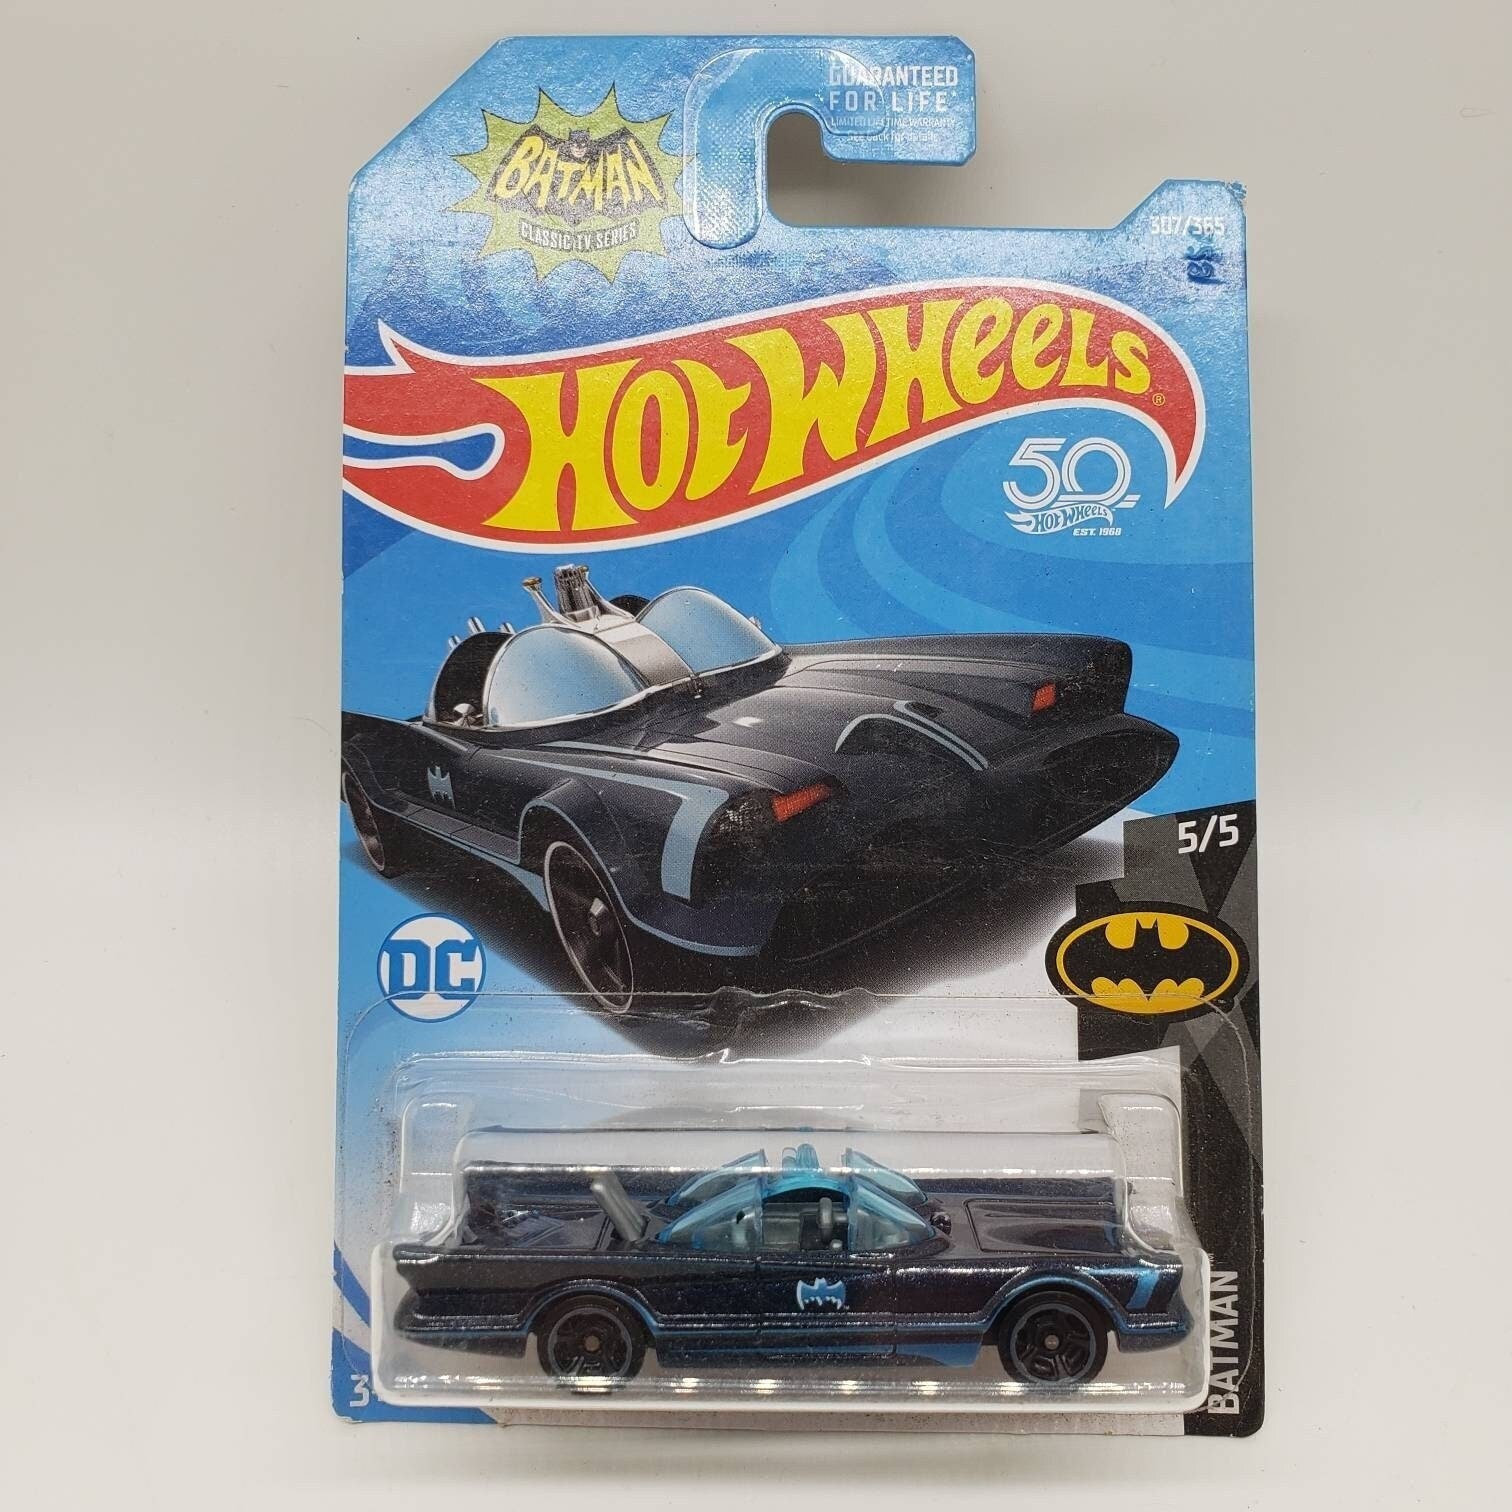 BATMAN CLASSIC TV SERIES Batmobile with Lights and Music Sculpture